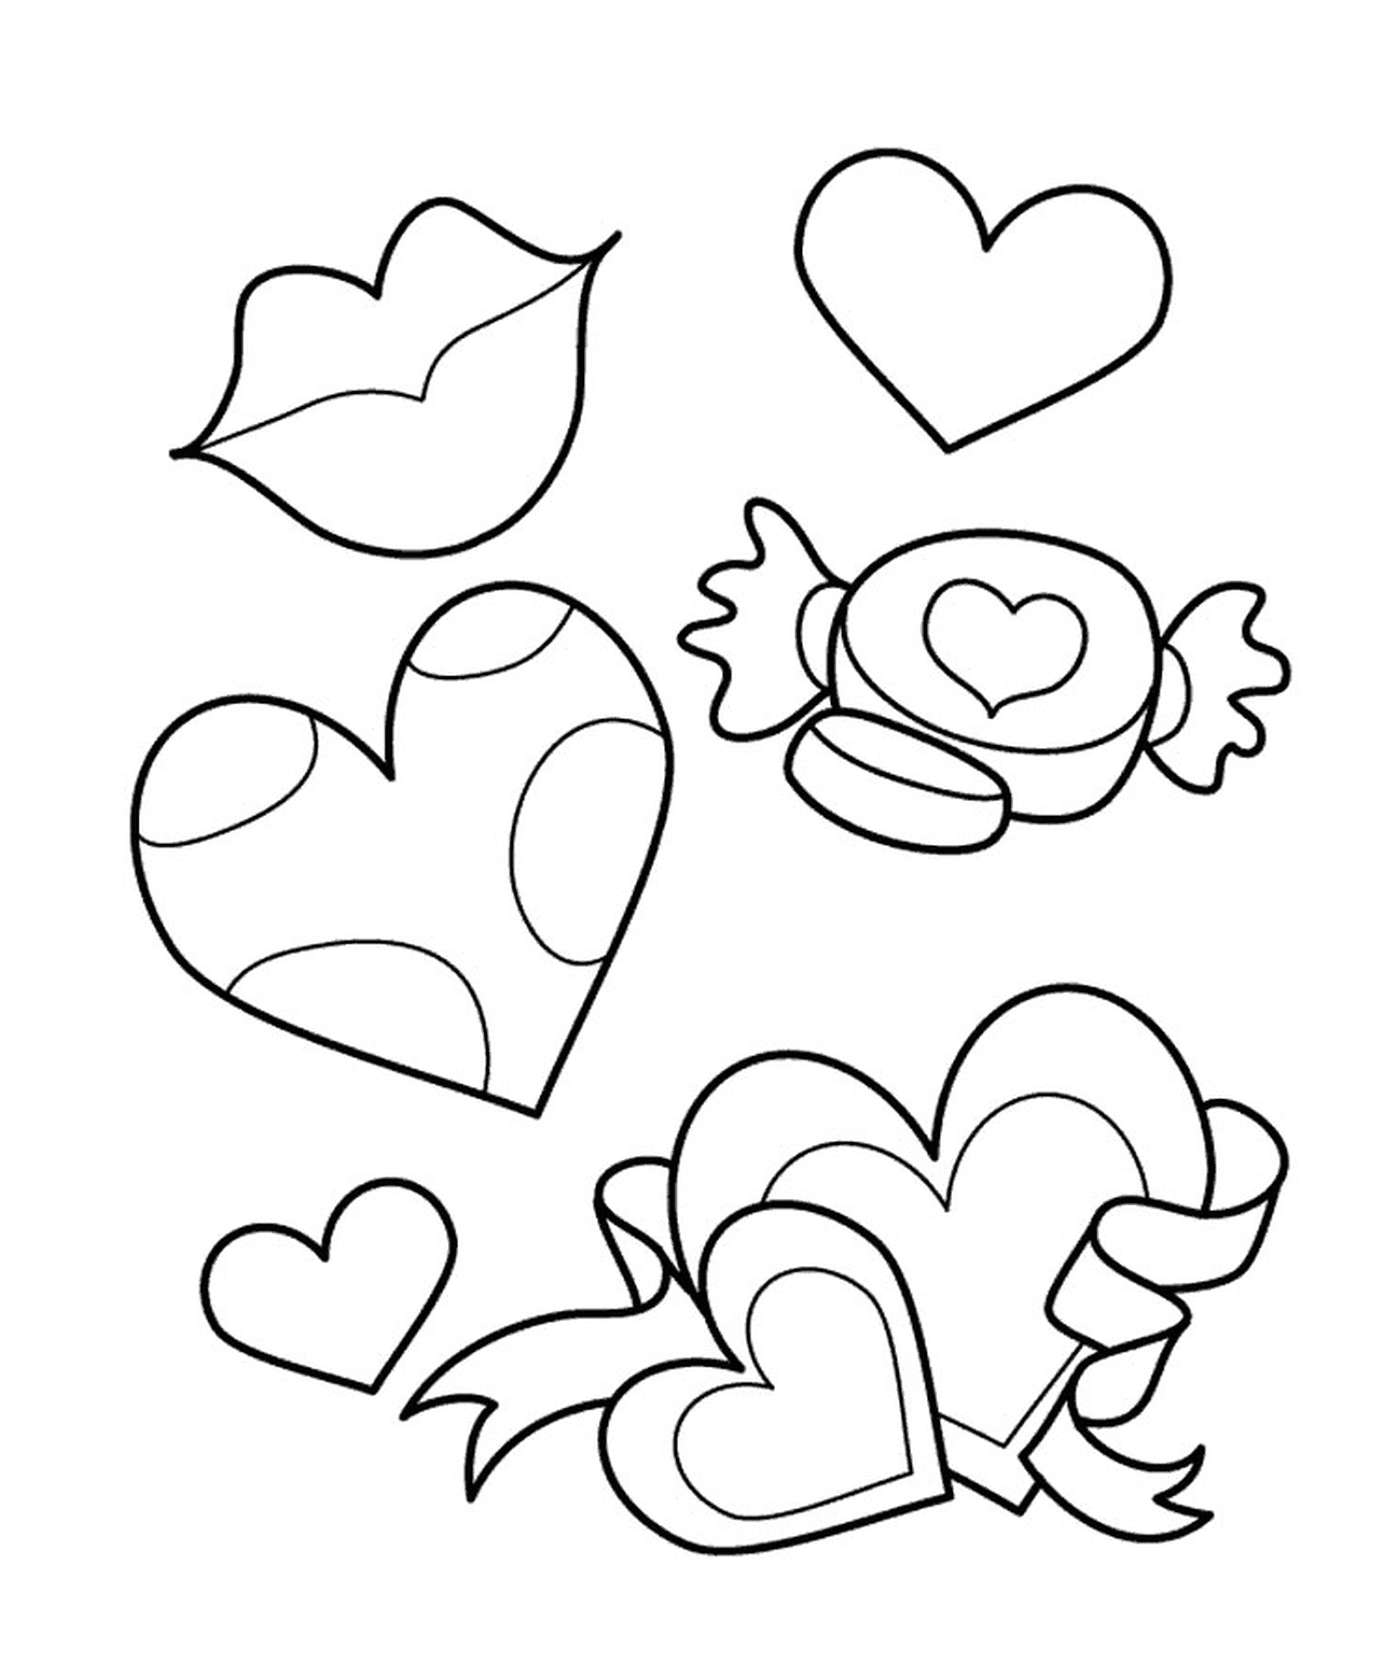  A variety of shapes and sizes of hearts 